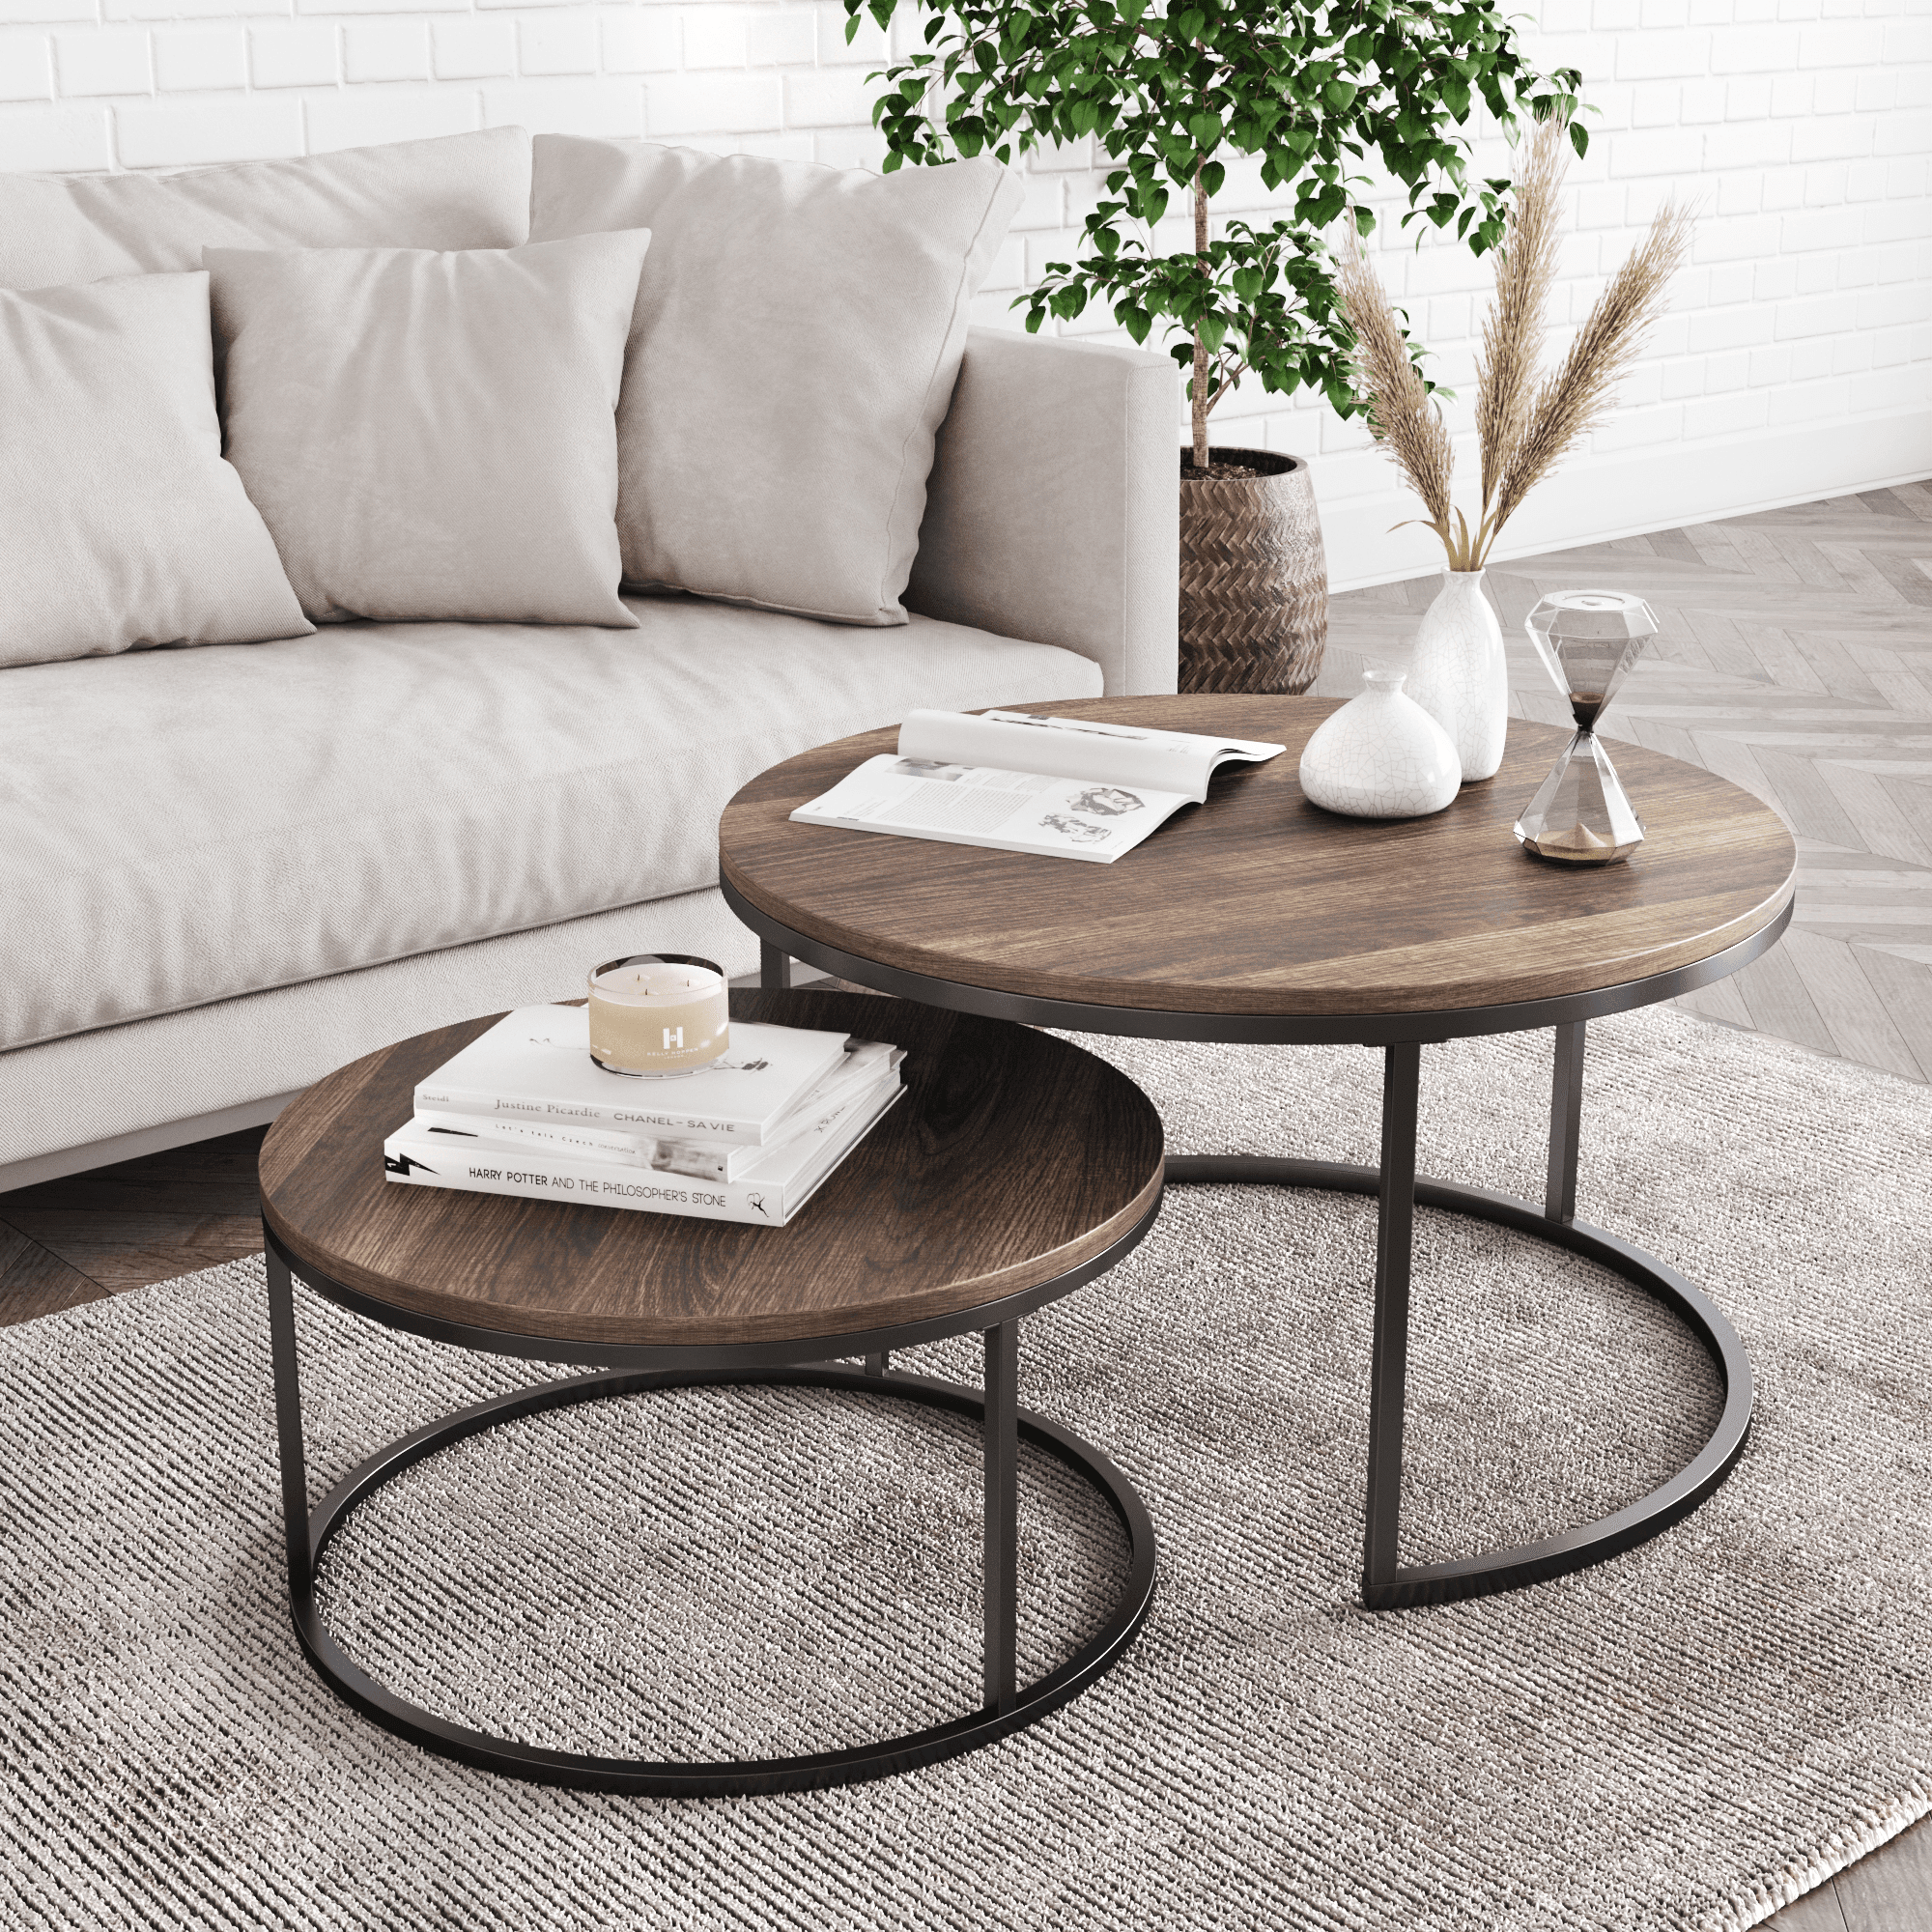 Stella Round Nesting Or Stacking Coffee Table Set Of 2 Wood Finish Throughout Nesting Coffee Tables (View 2 of 15)